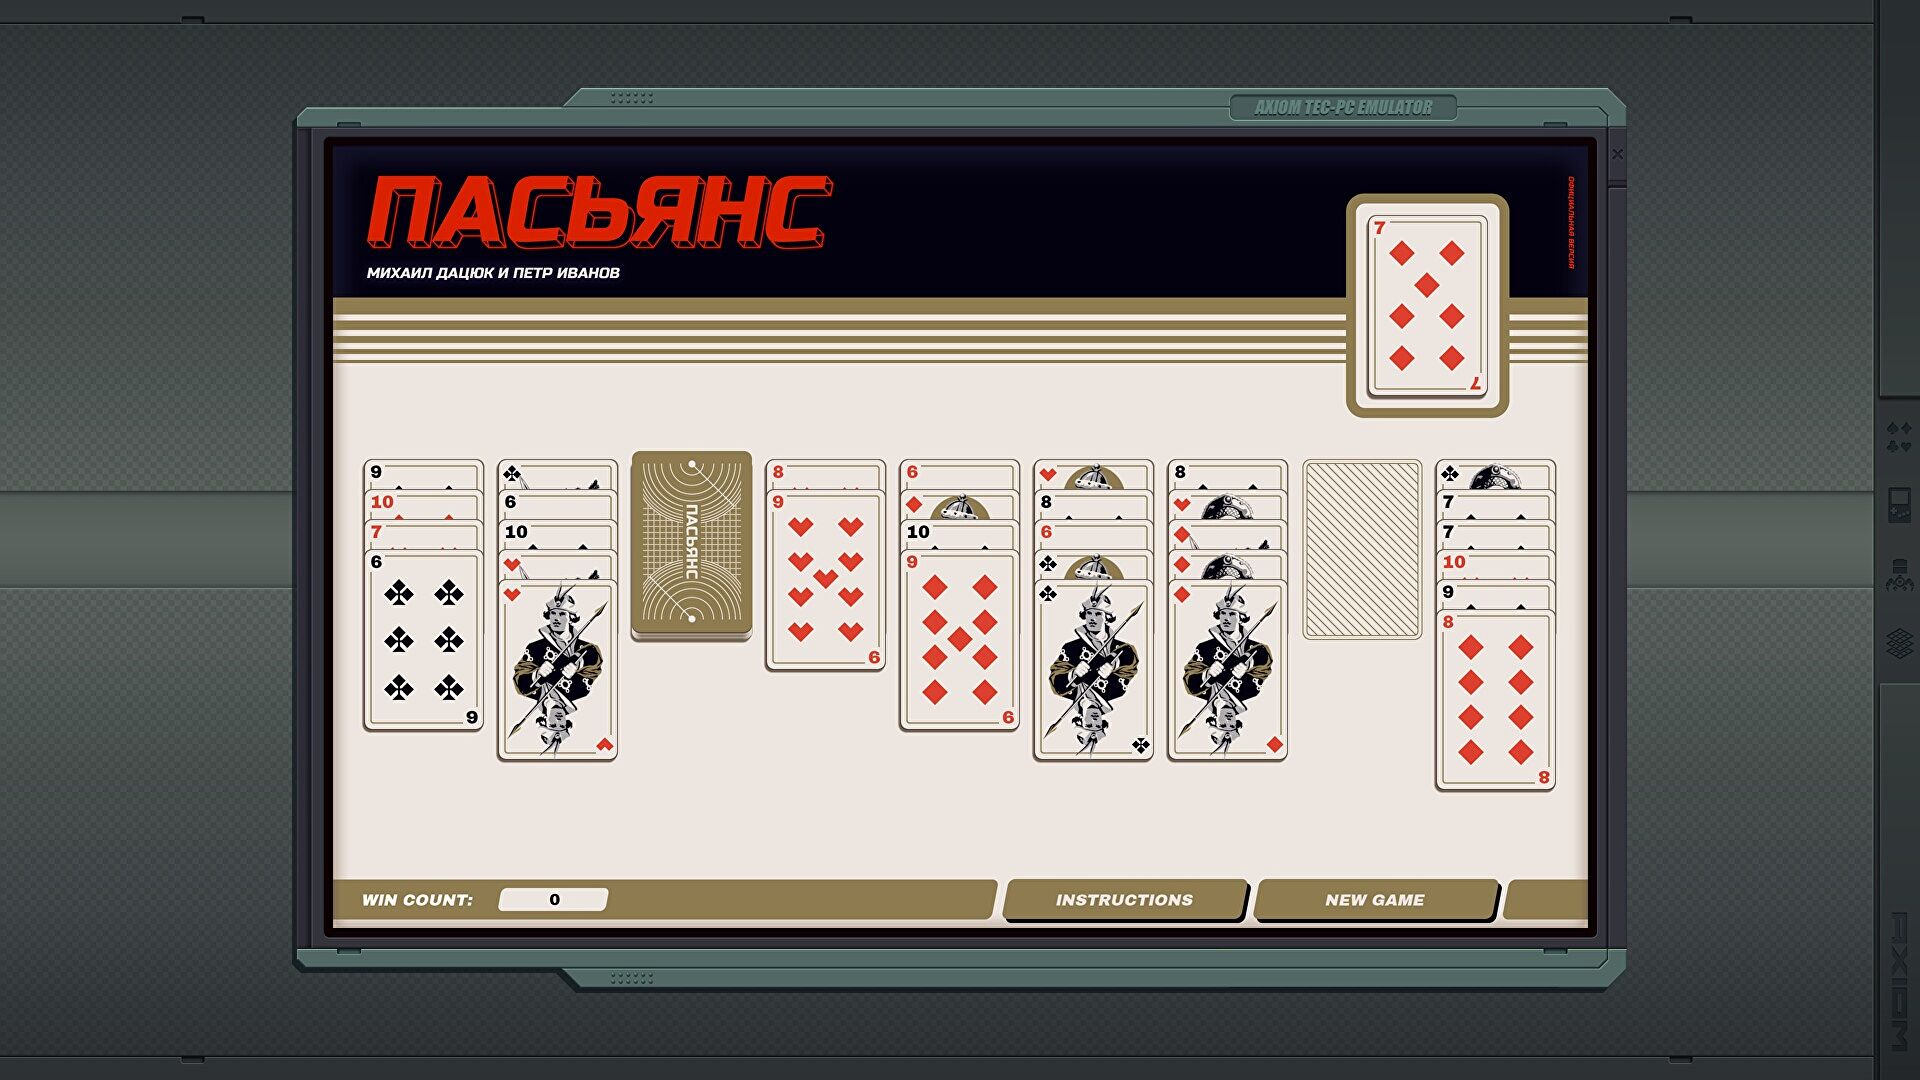 Zachtronics are collecting all their solitaire games together in September